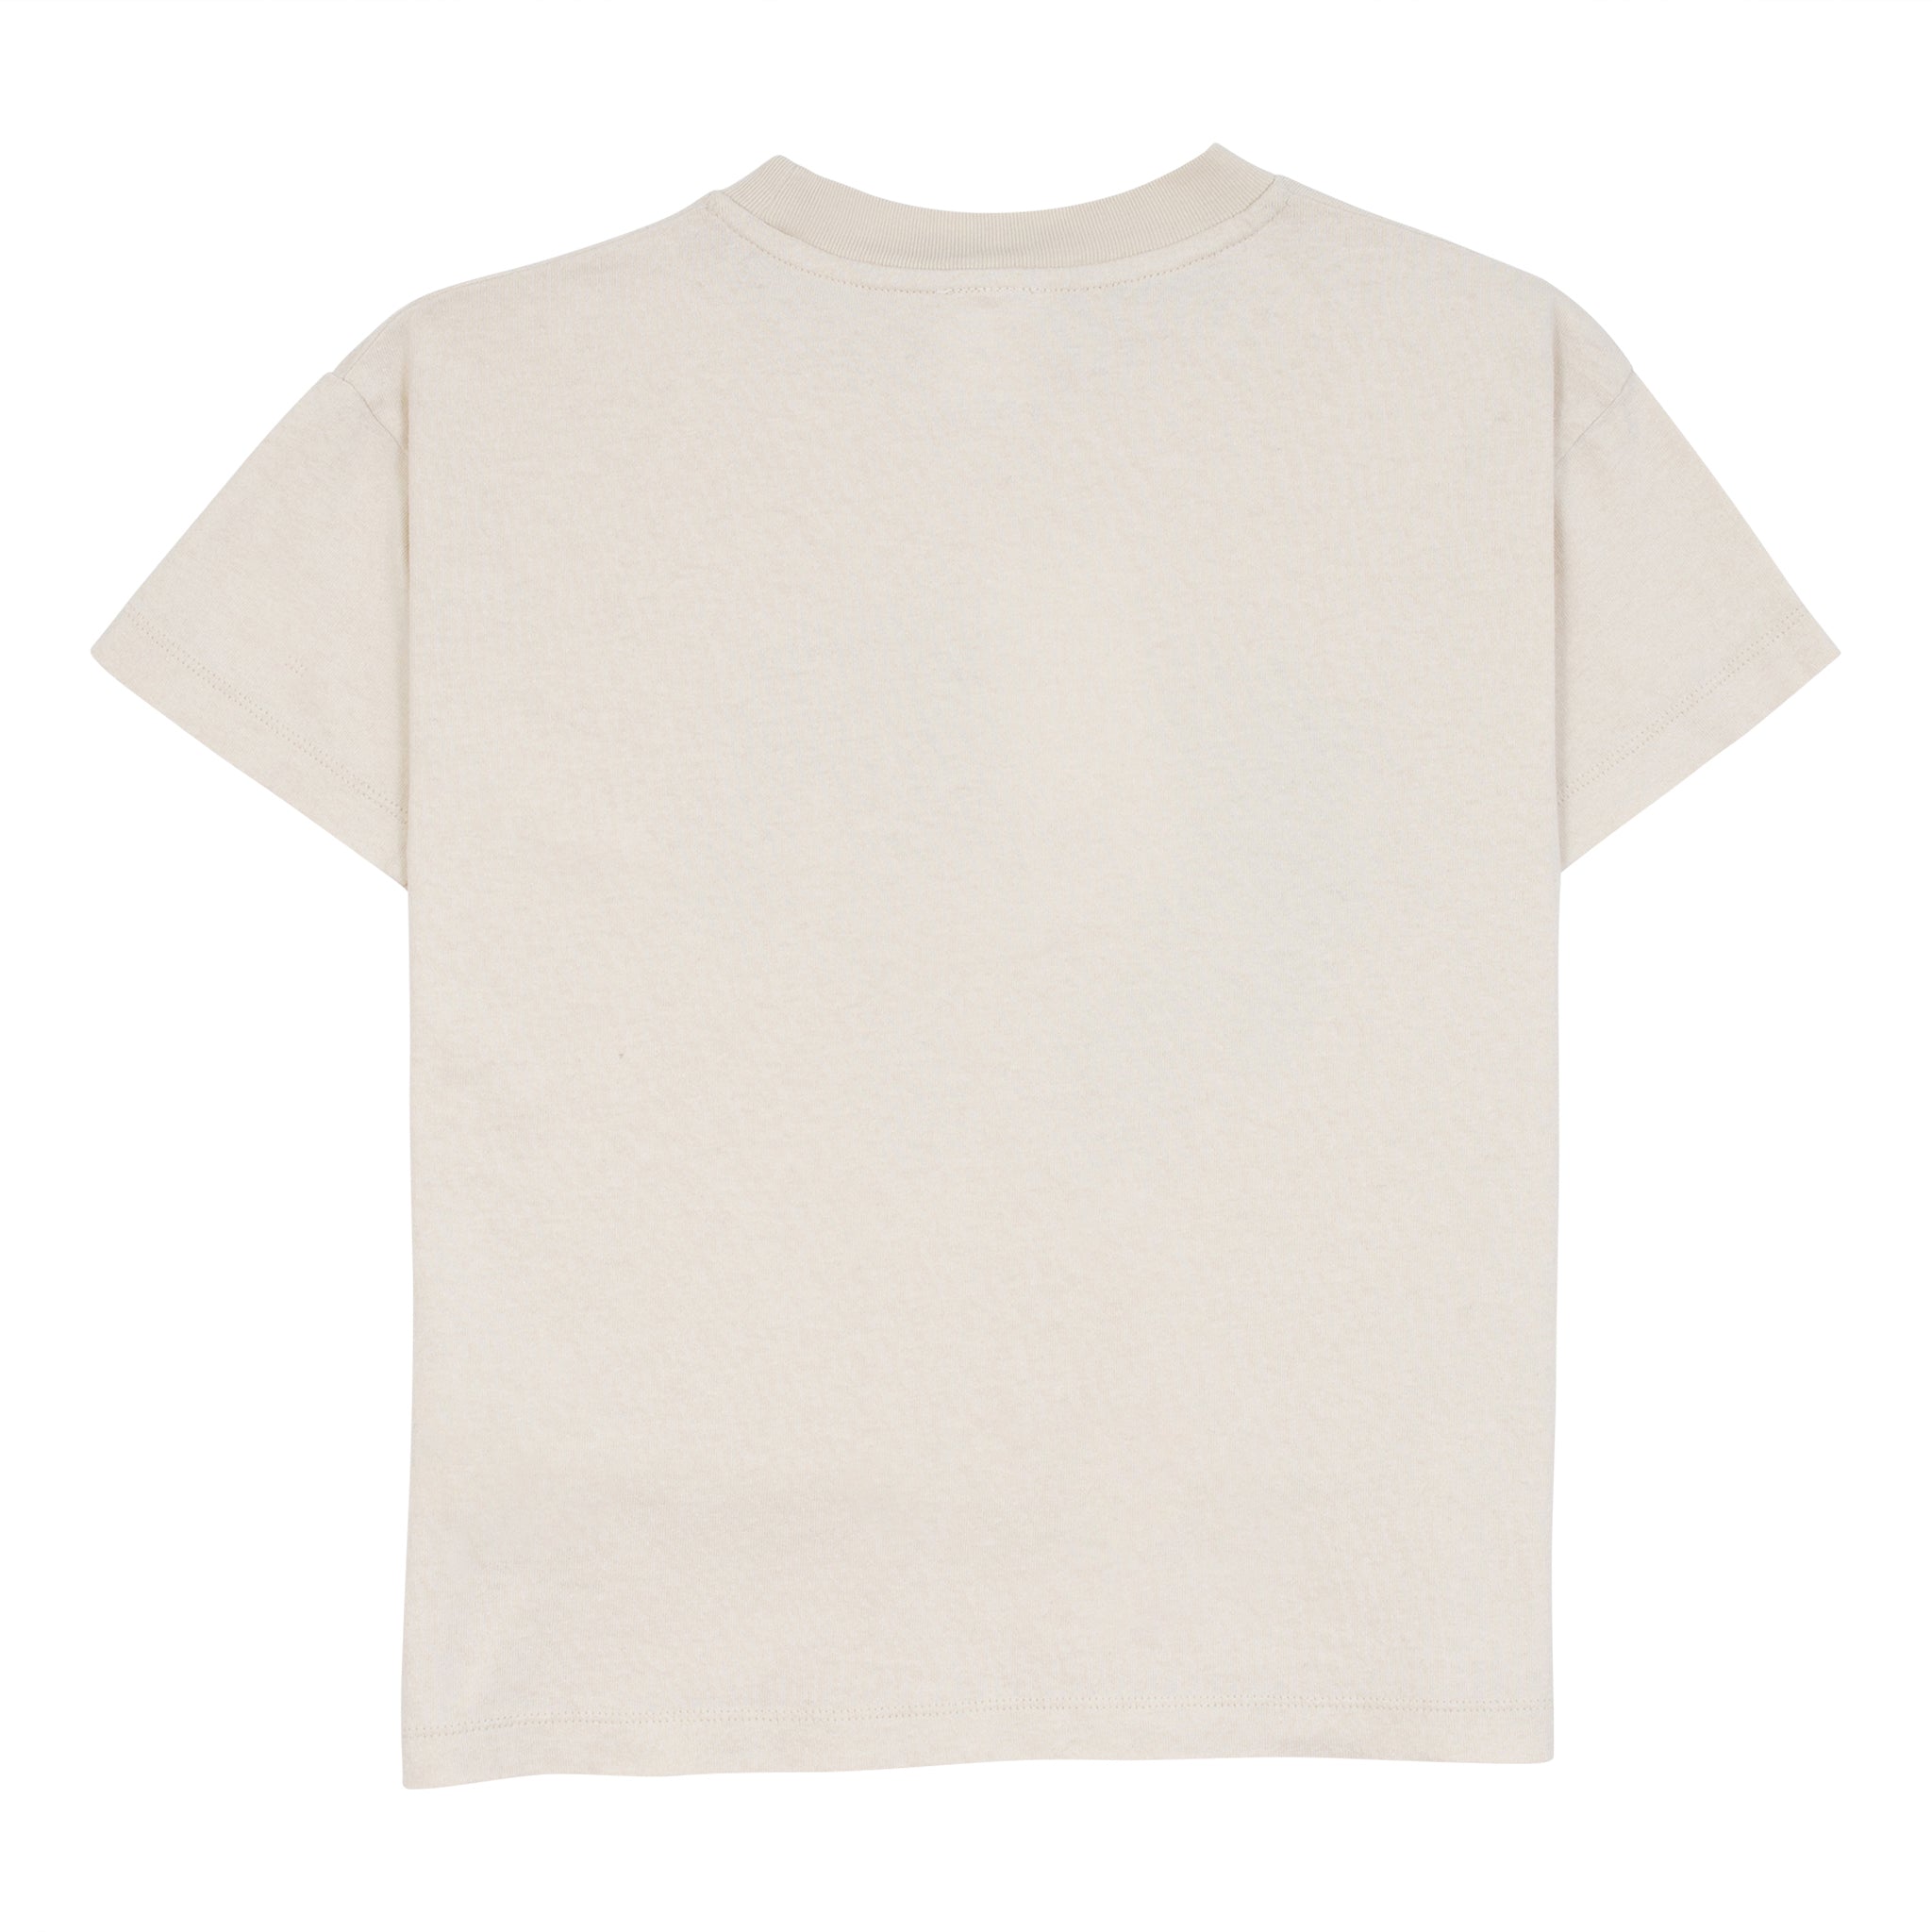 Crabe Tee - Tide White